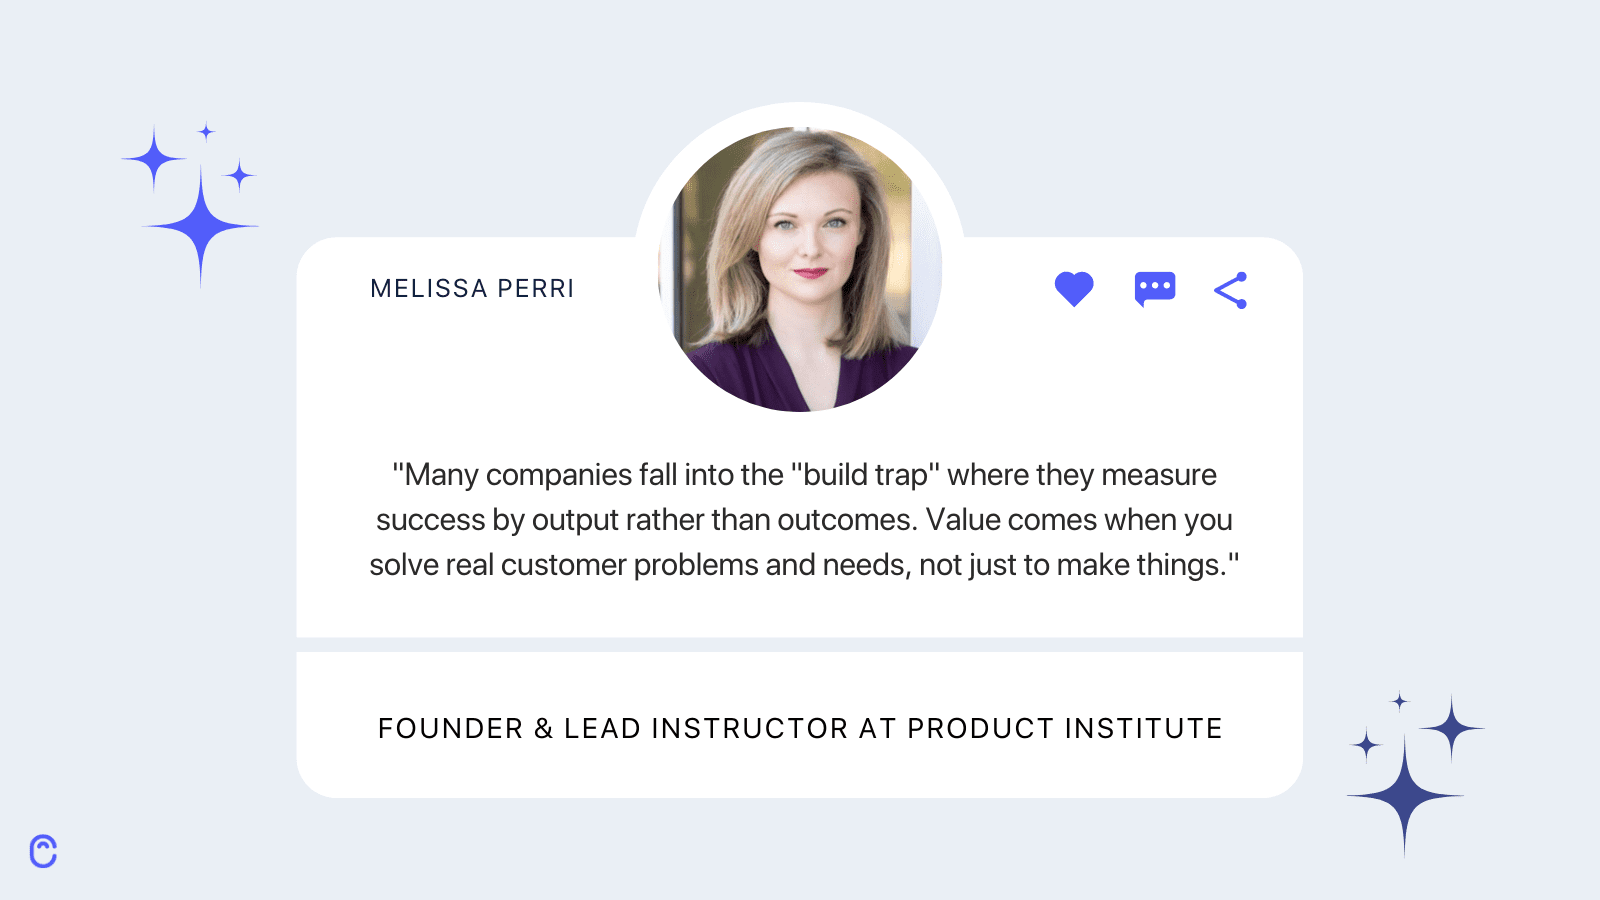 Melissa Perri, founder & lead instructor at Product Institute